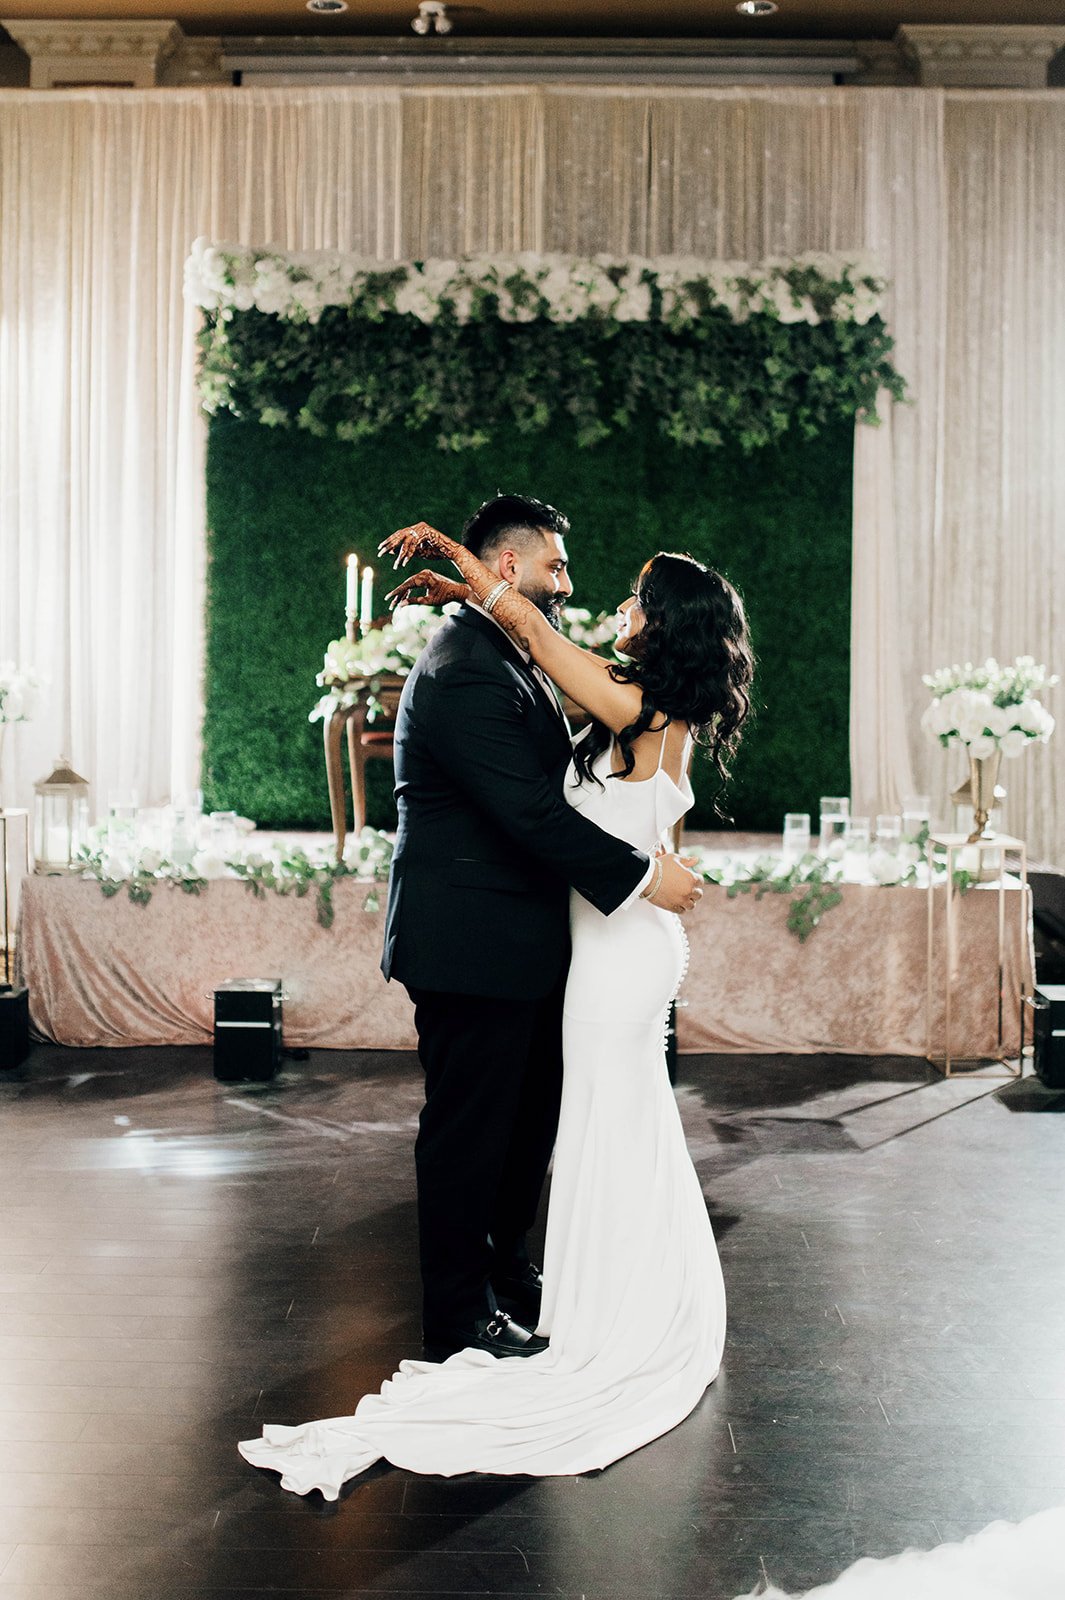 A bride and groom have their first dance in front of their head table.